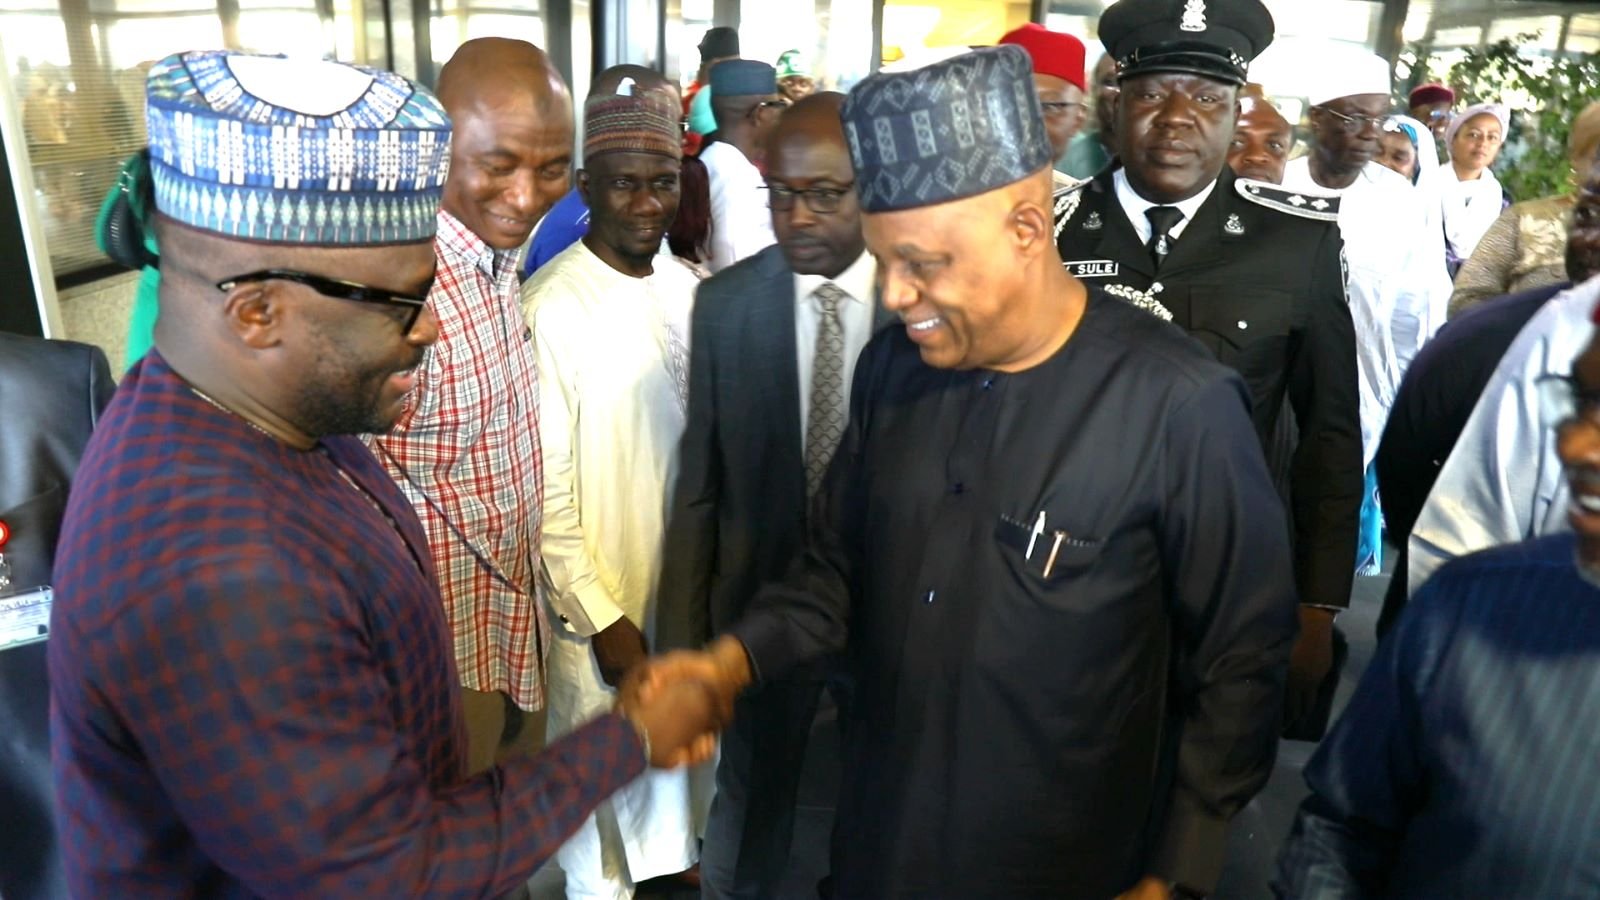 Vice President Shettima arrives in Italy ahead of UN food systems summit 